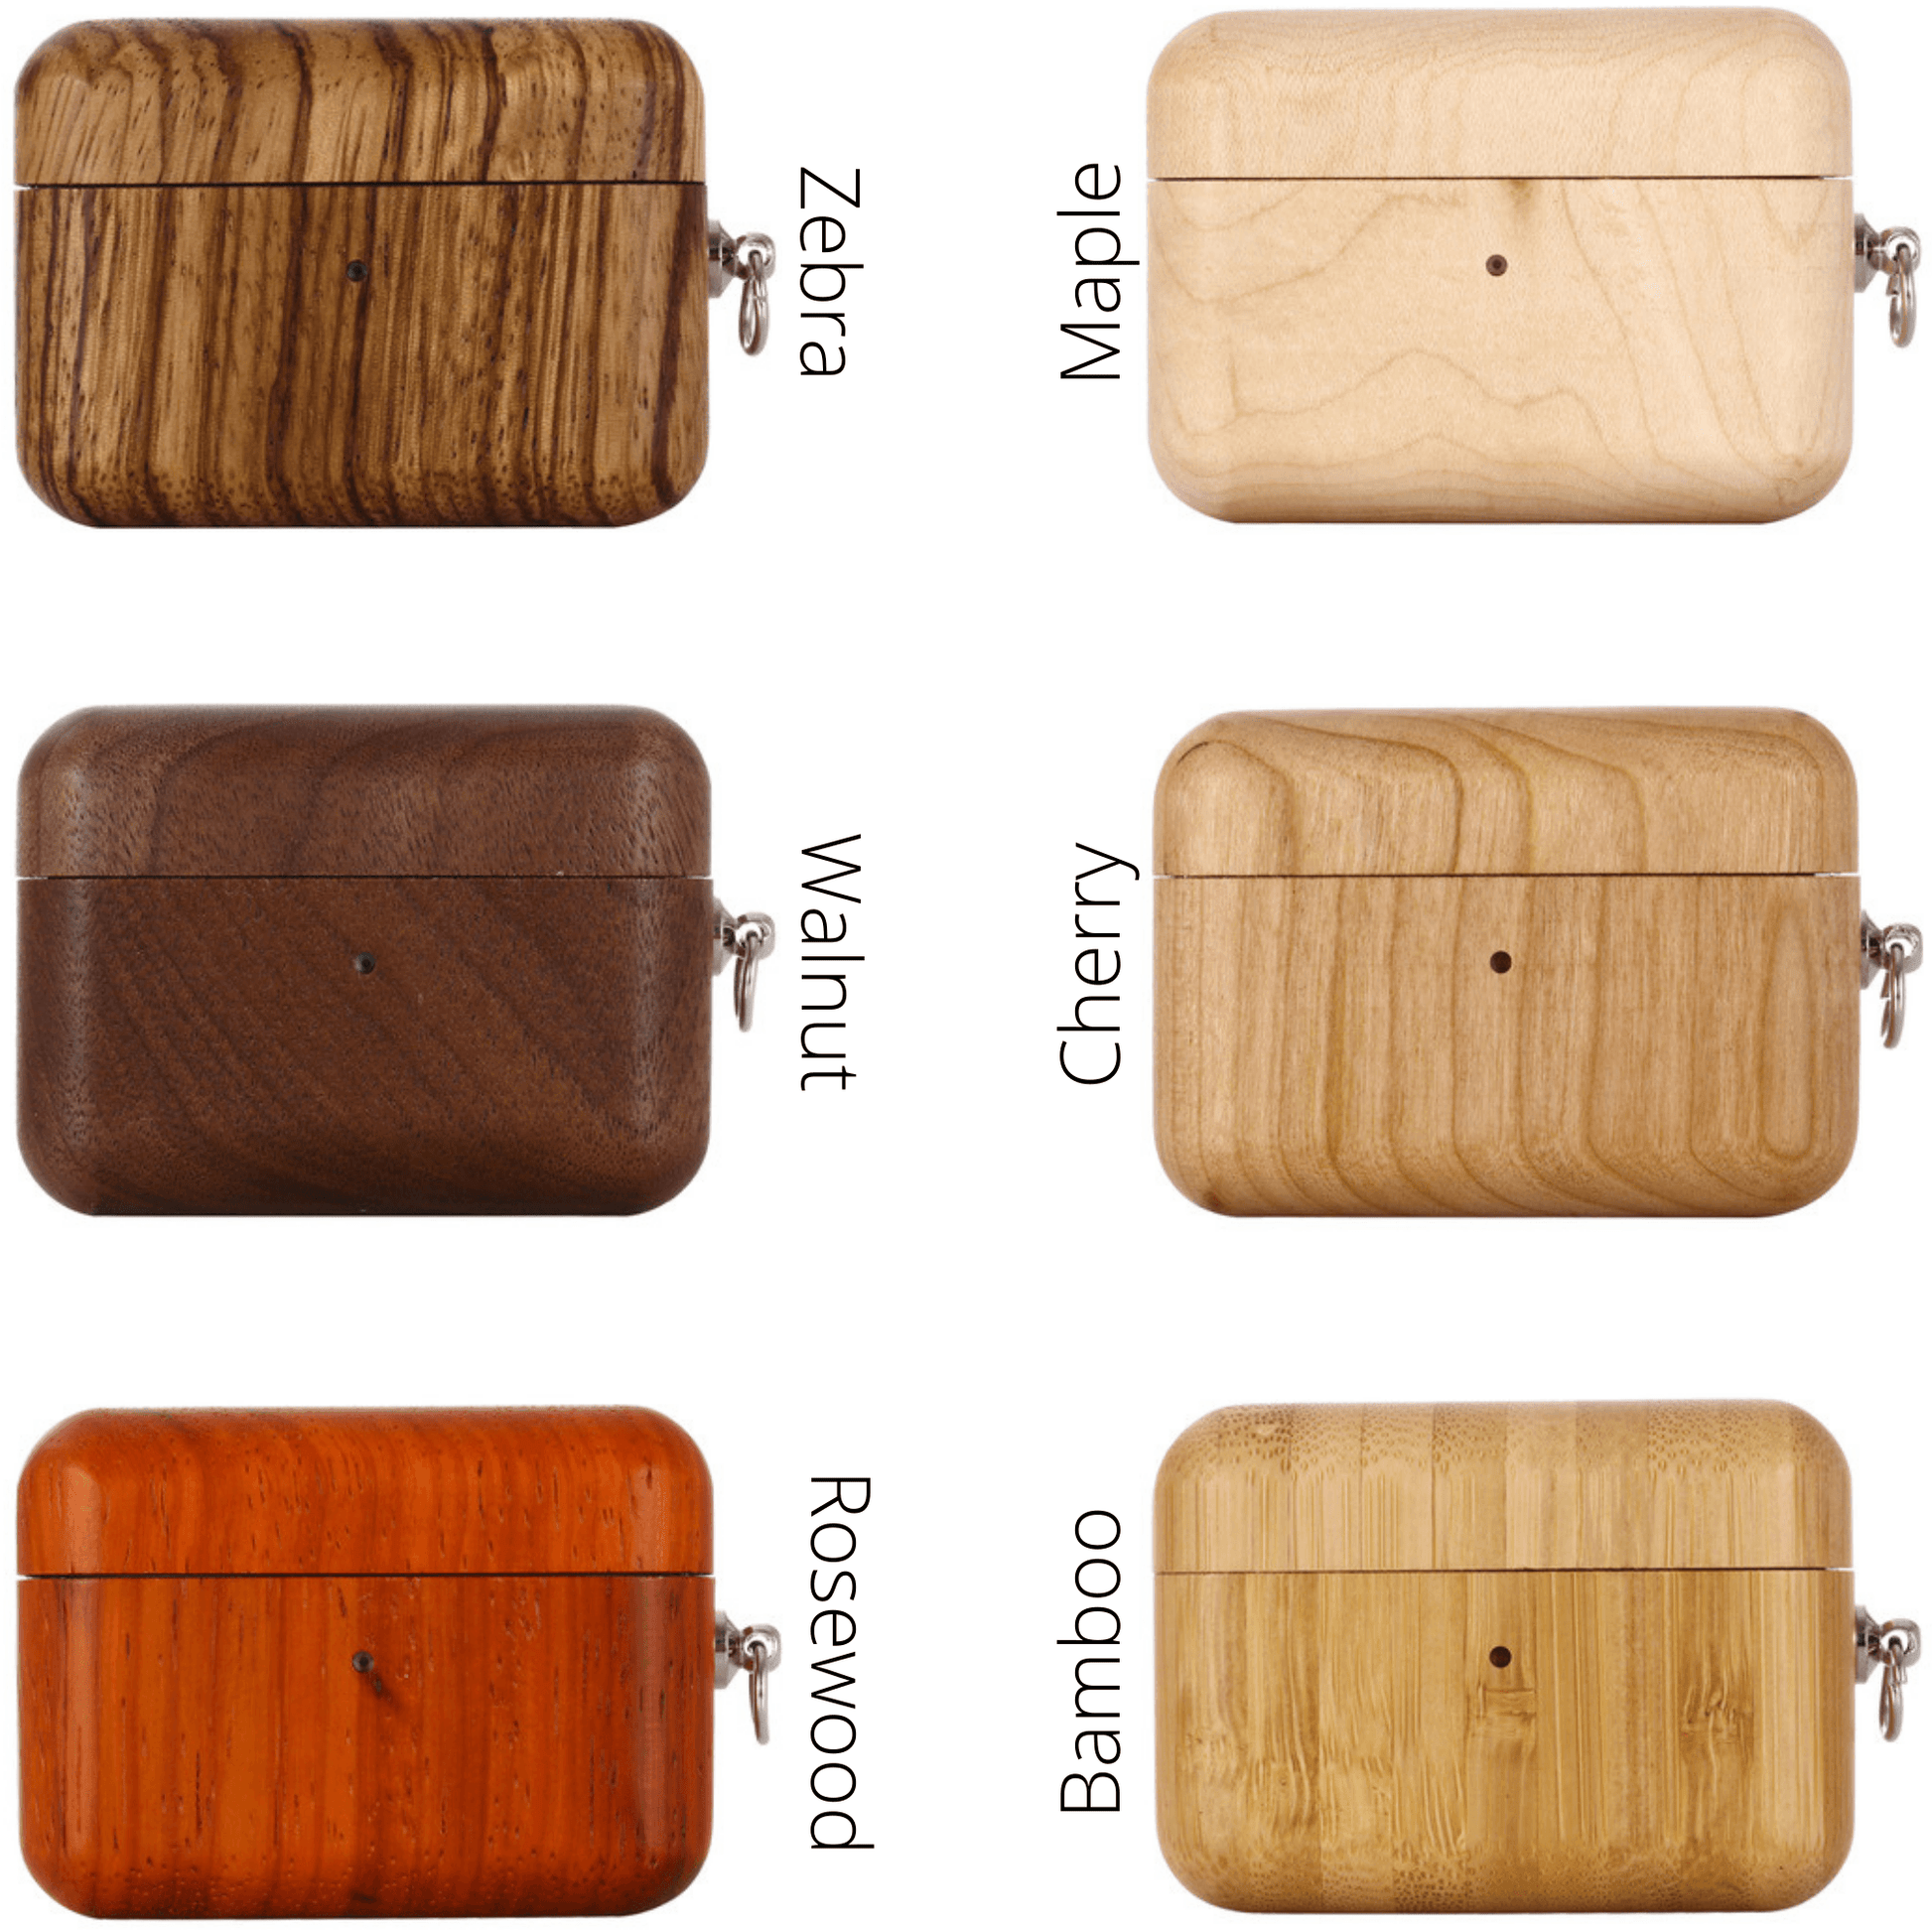 Bamboo AirPods Pro Case with Keychain 🌳 Natural Wood. ♻️ Eco-friendly. ✈️ Free Worldwide Shipping. 🎁 Perfect Gift.